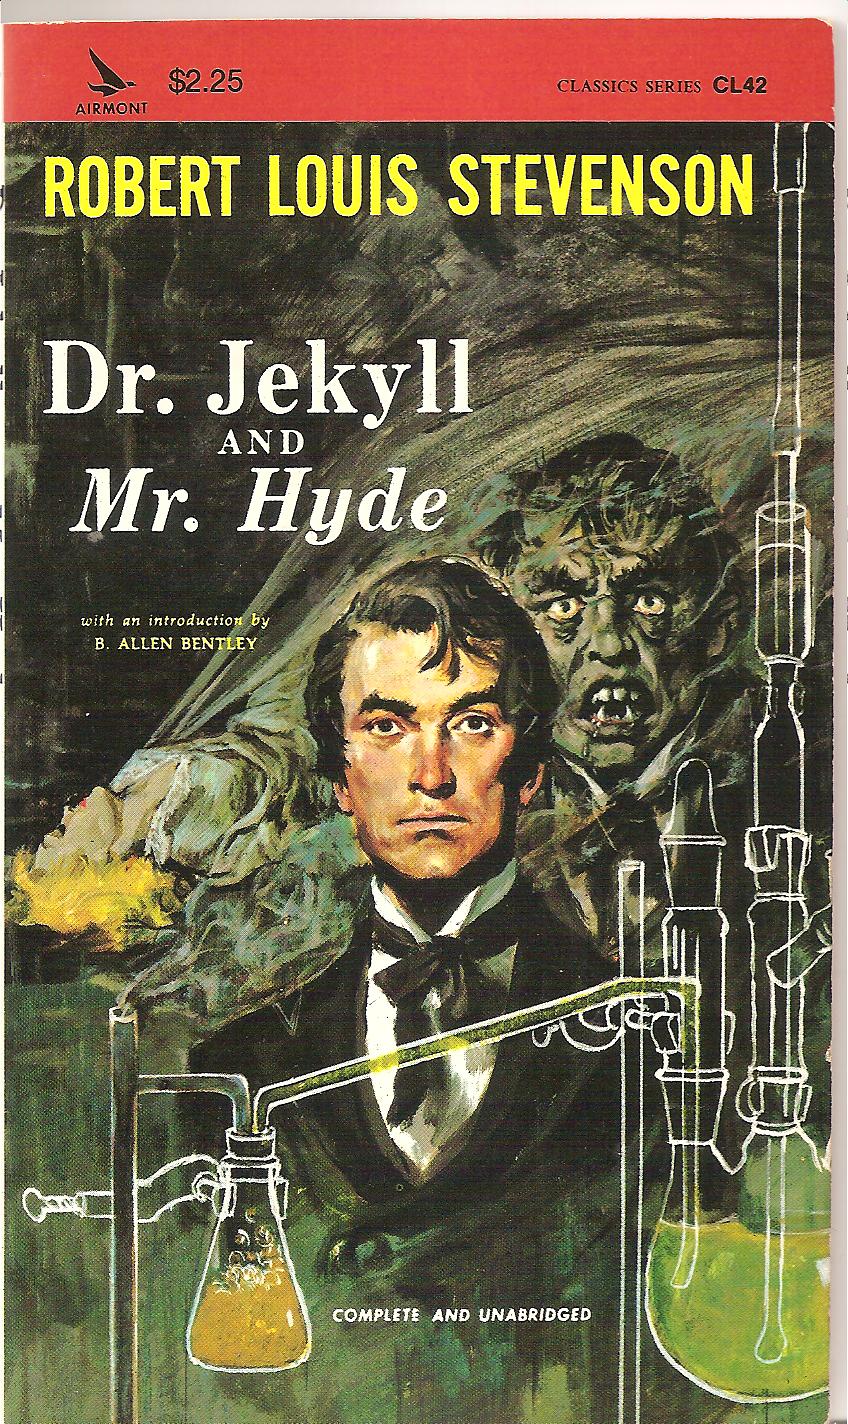 dr-jekyll-and-mr-hyde-revision-the-final-chapters-ks4-gcse-english-lit-teaching-resources